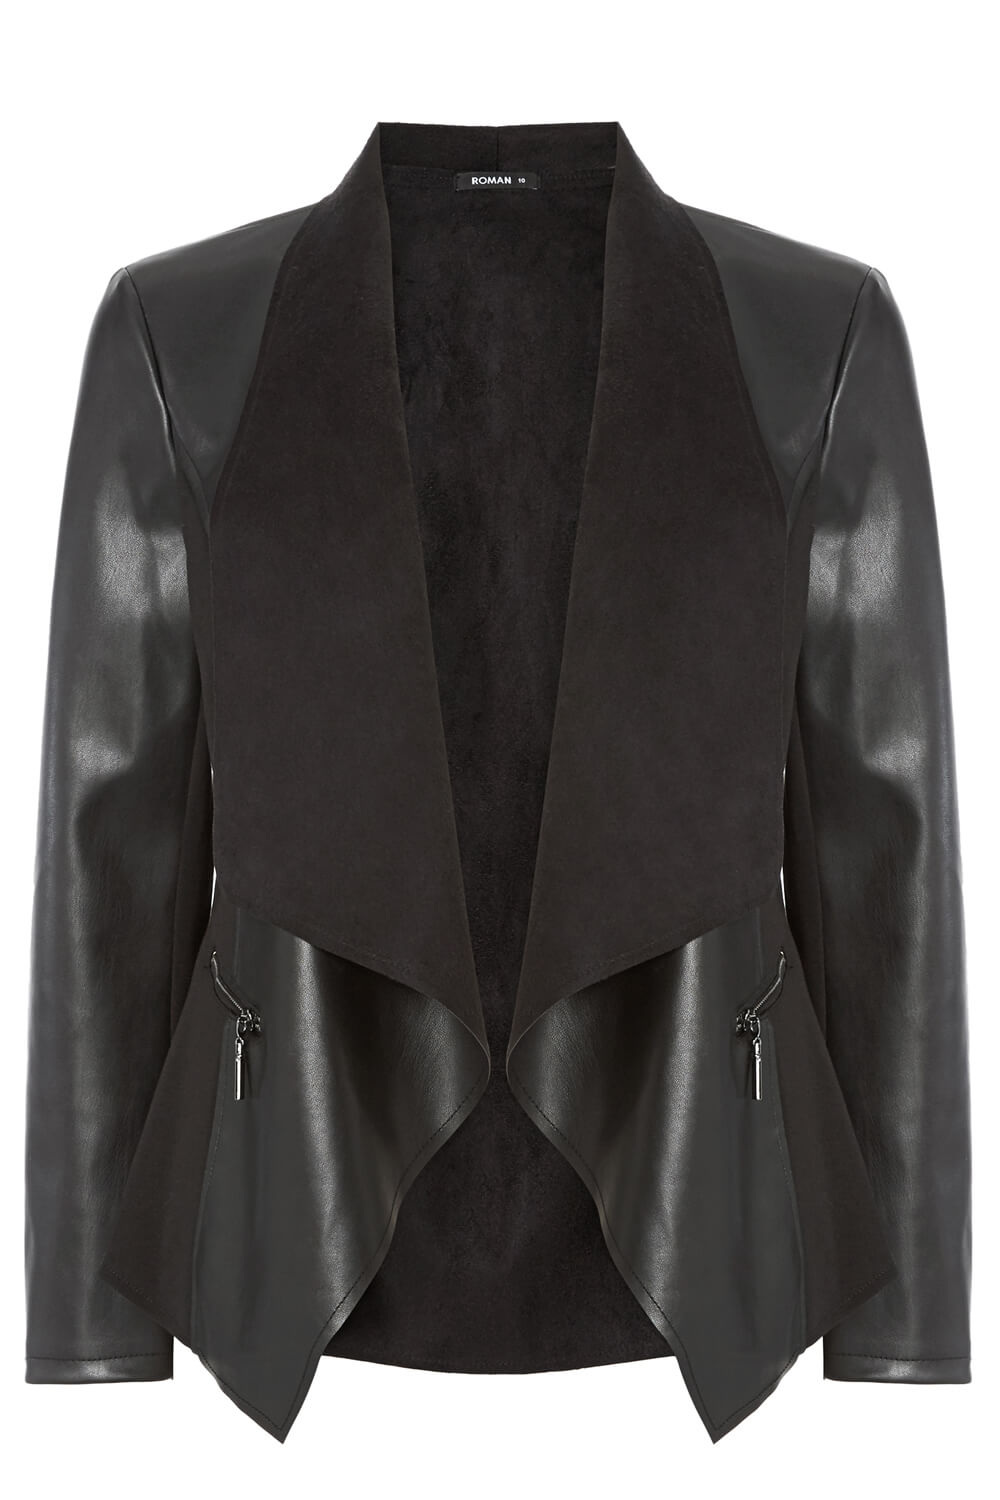 Black Faux Leather Suedette Waterfall Jacket, Image 5 of 5